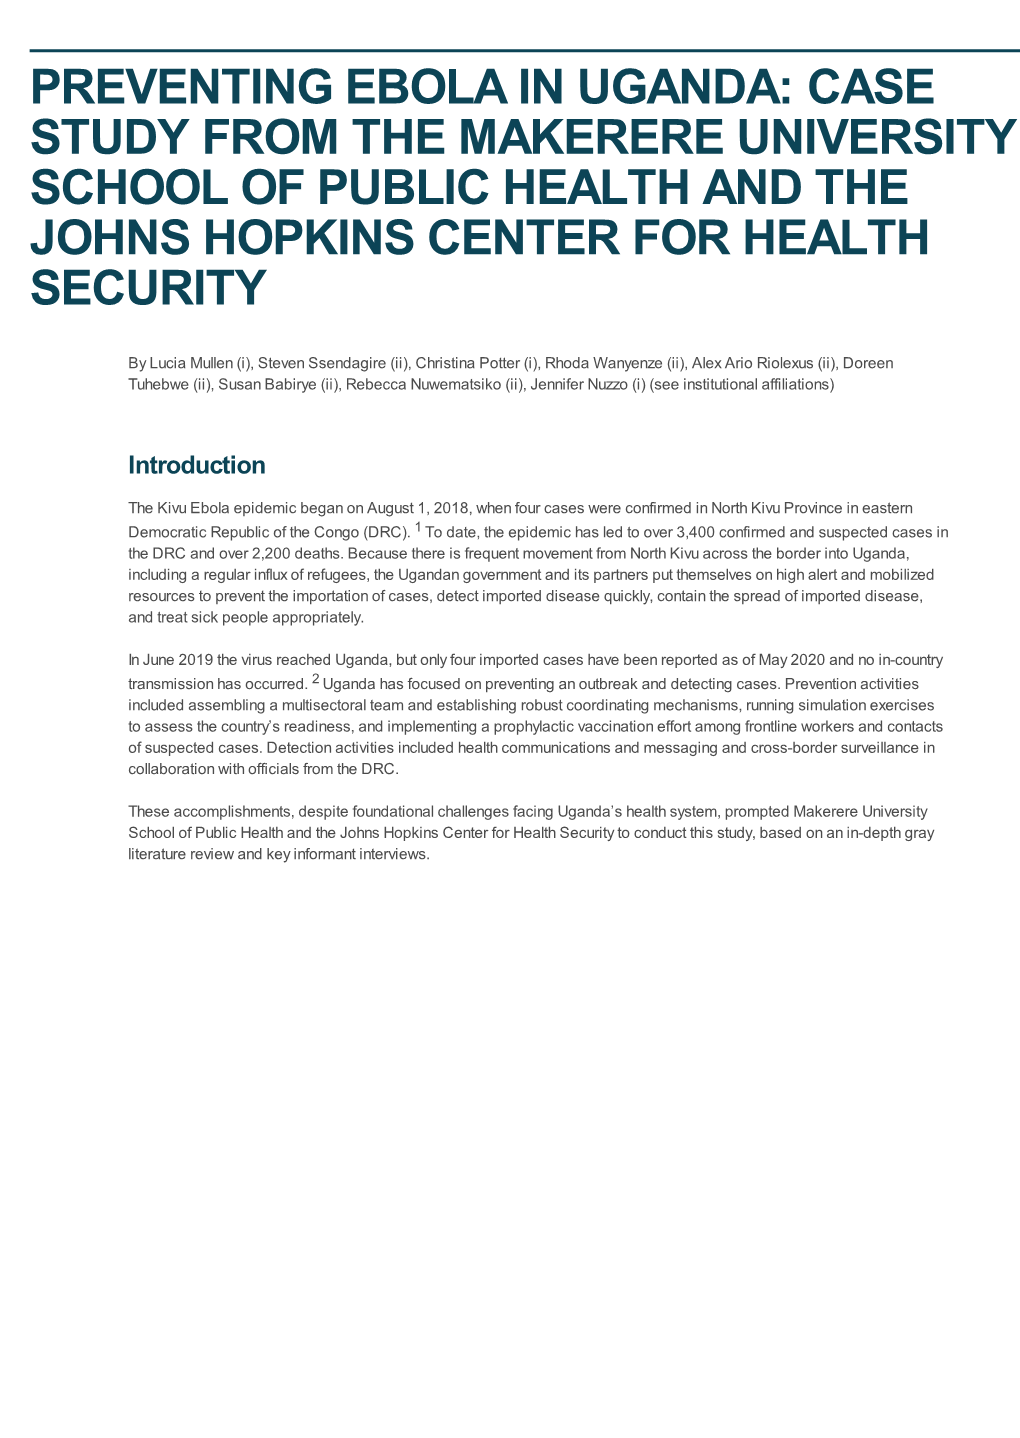 Preventing Ebola in Uganda: Case Study from the Makerere University School of Public Health and the Johns Hopkins Center for Health Security